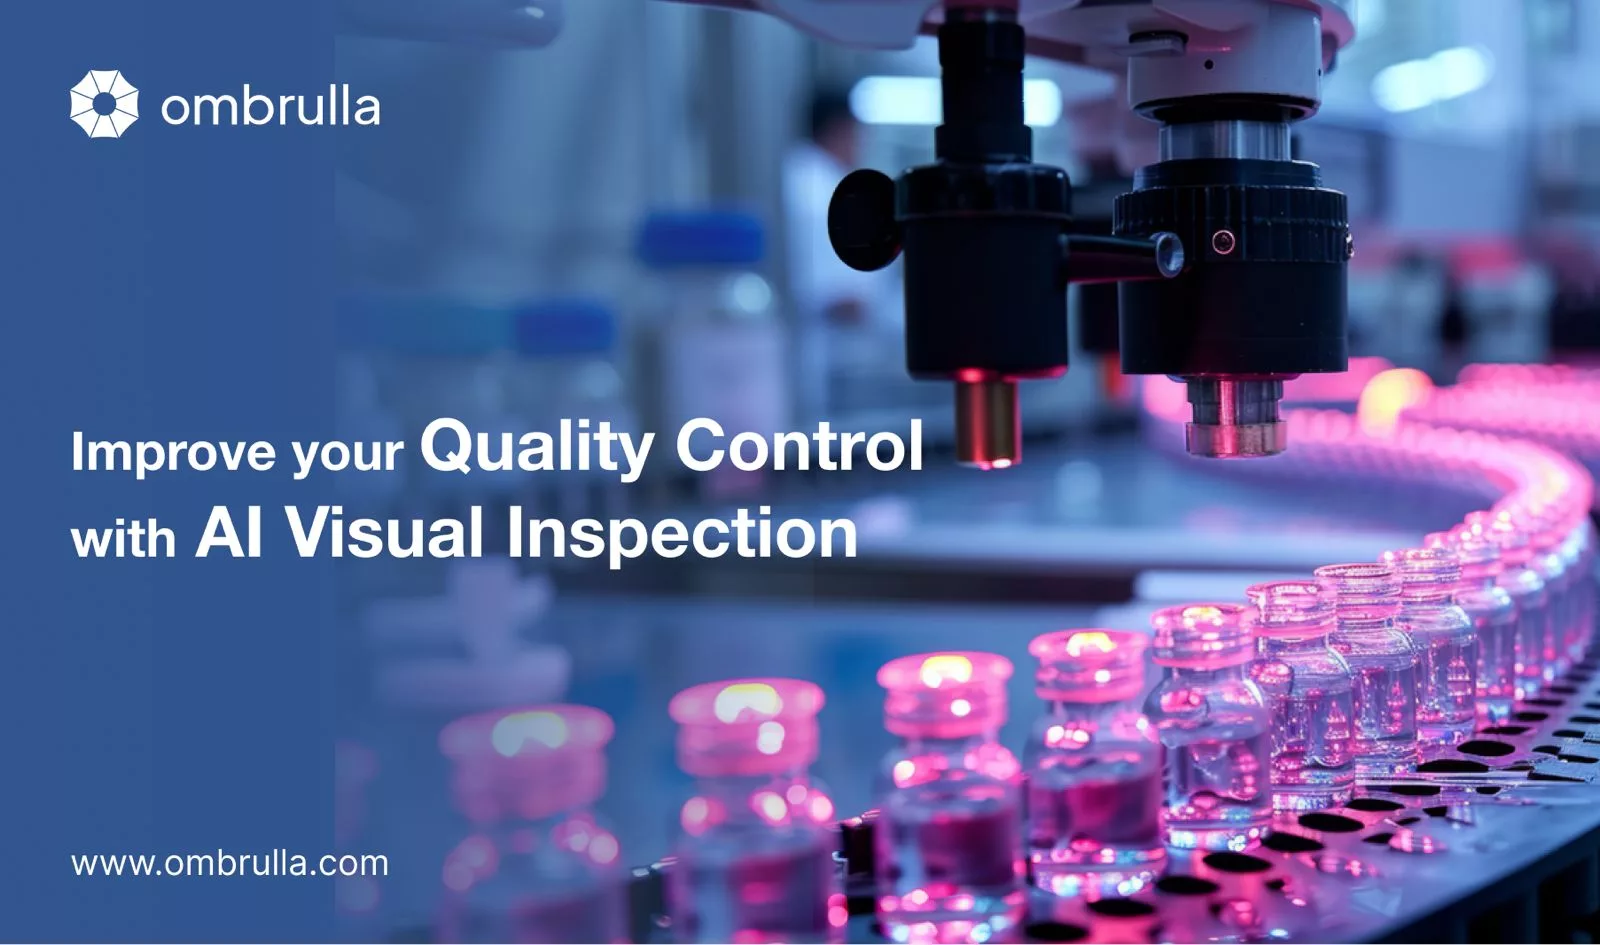 How to include AI Visual Inspection into your quality control process